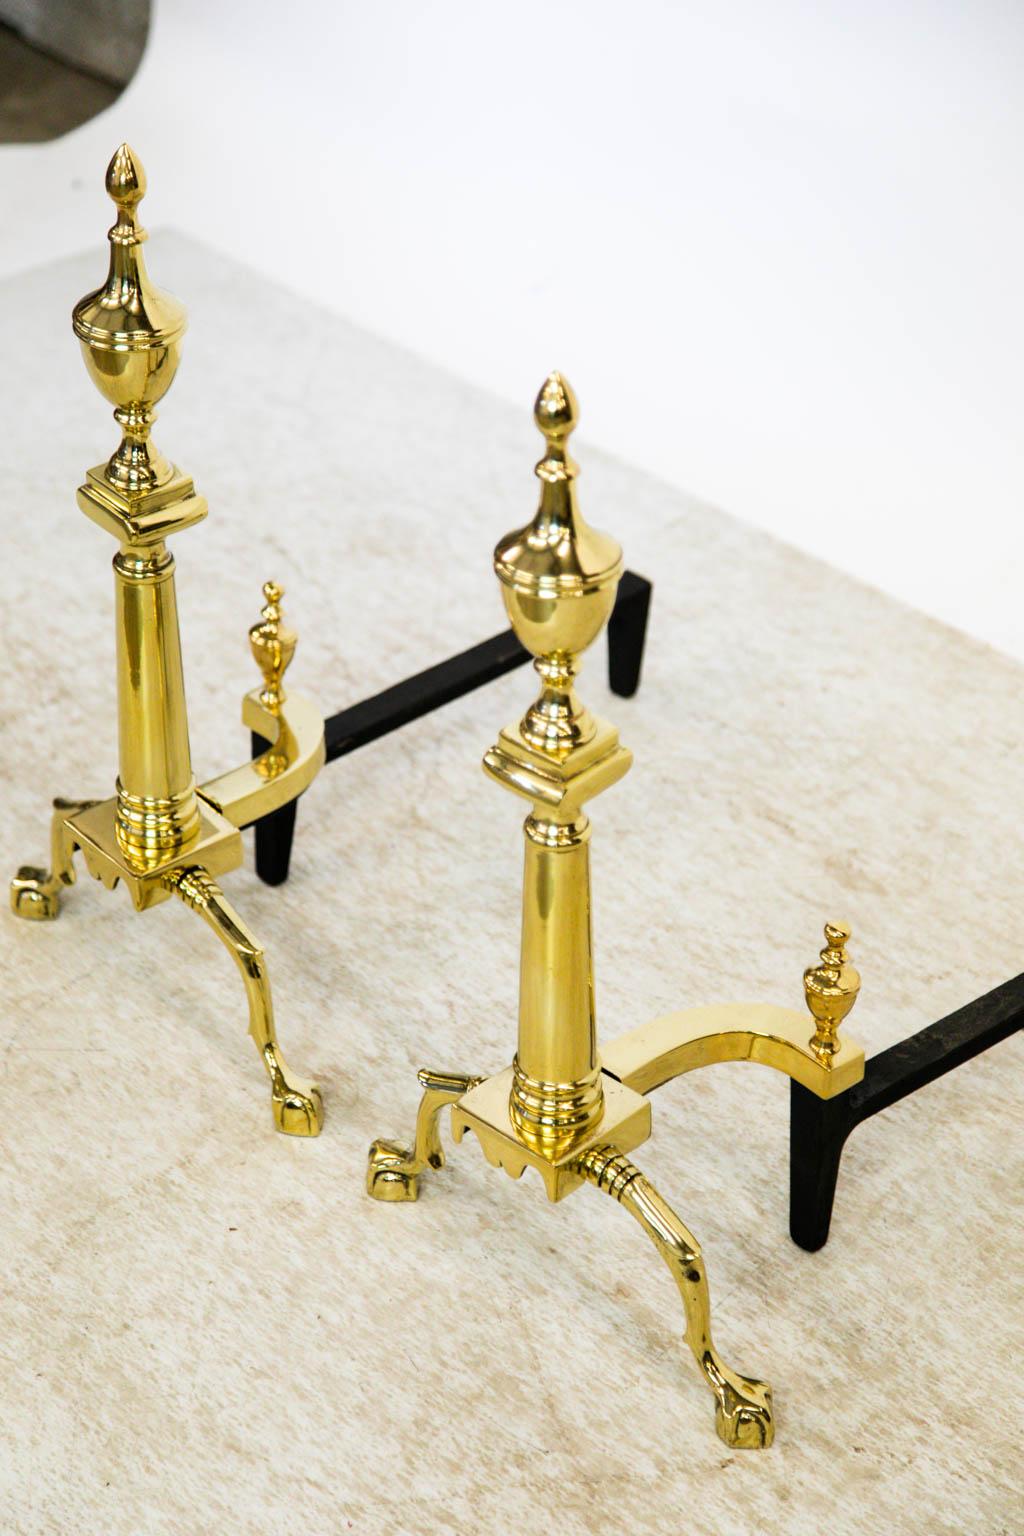 These American andirons have been polished and lacquered for ease of maintenance. The steel supports have been painted black.